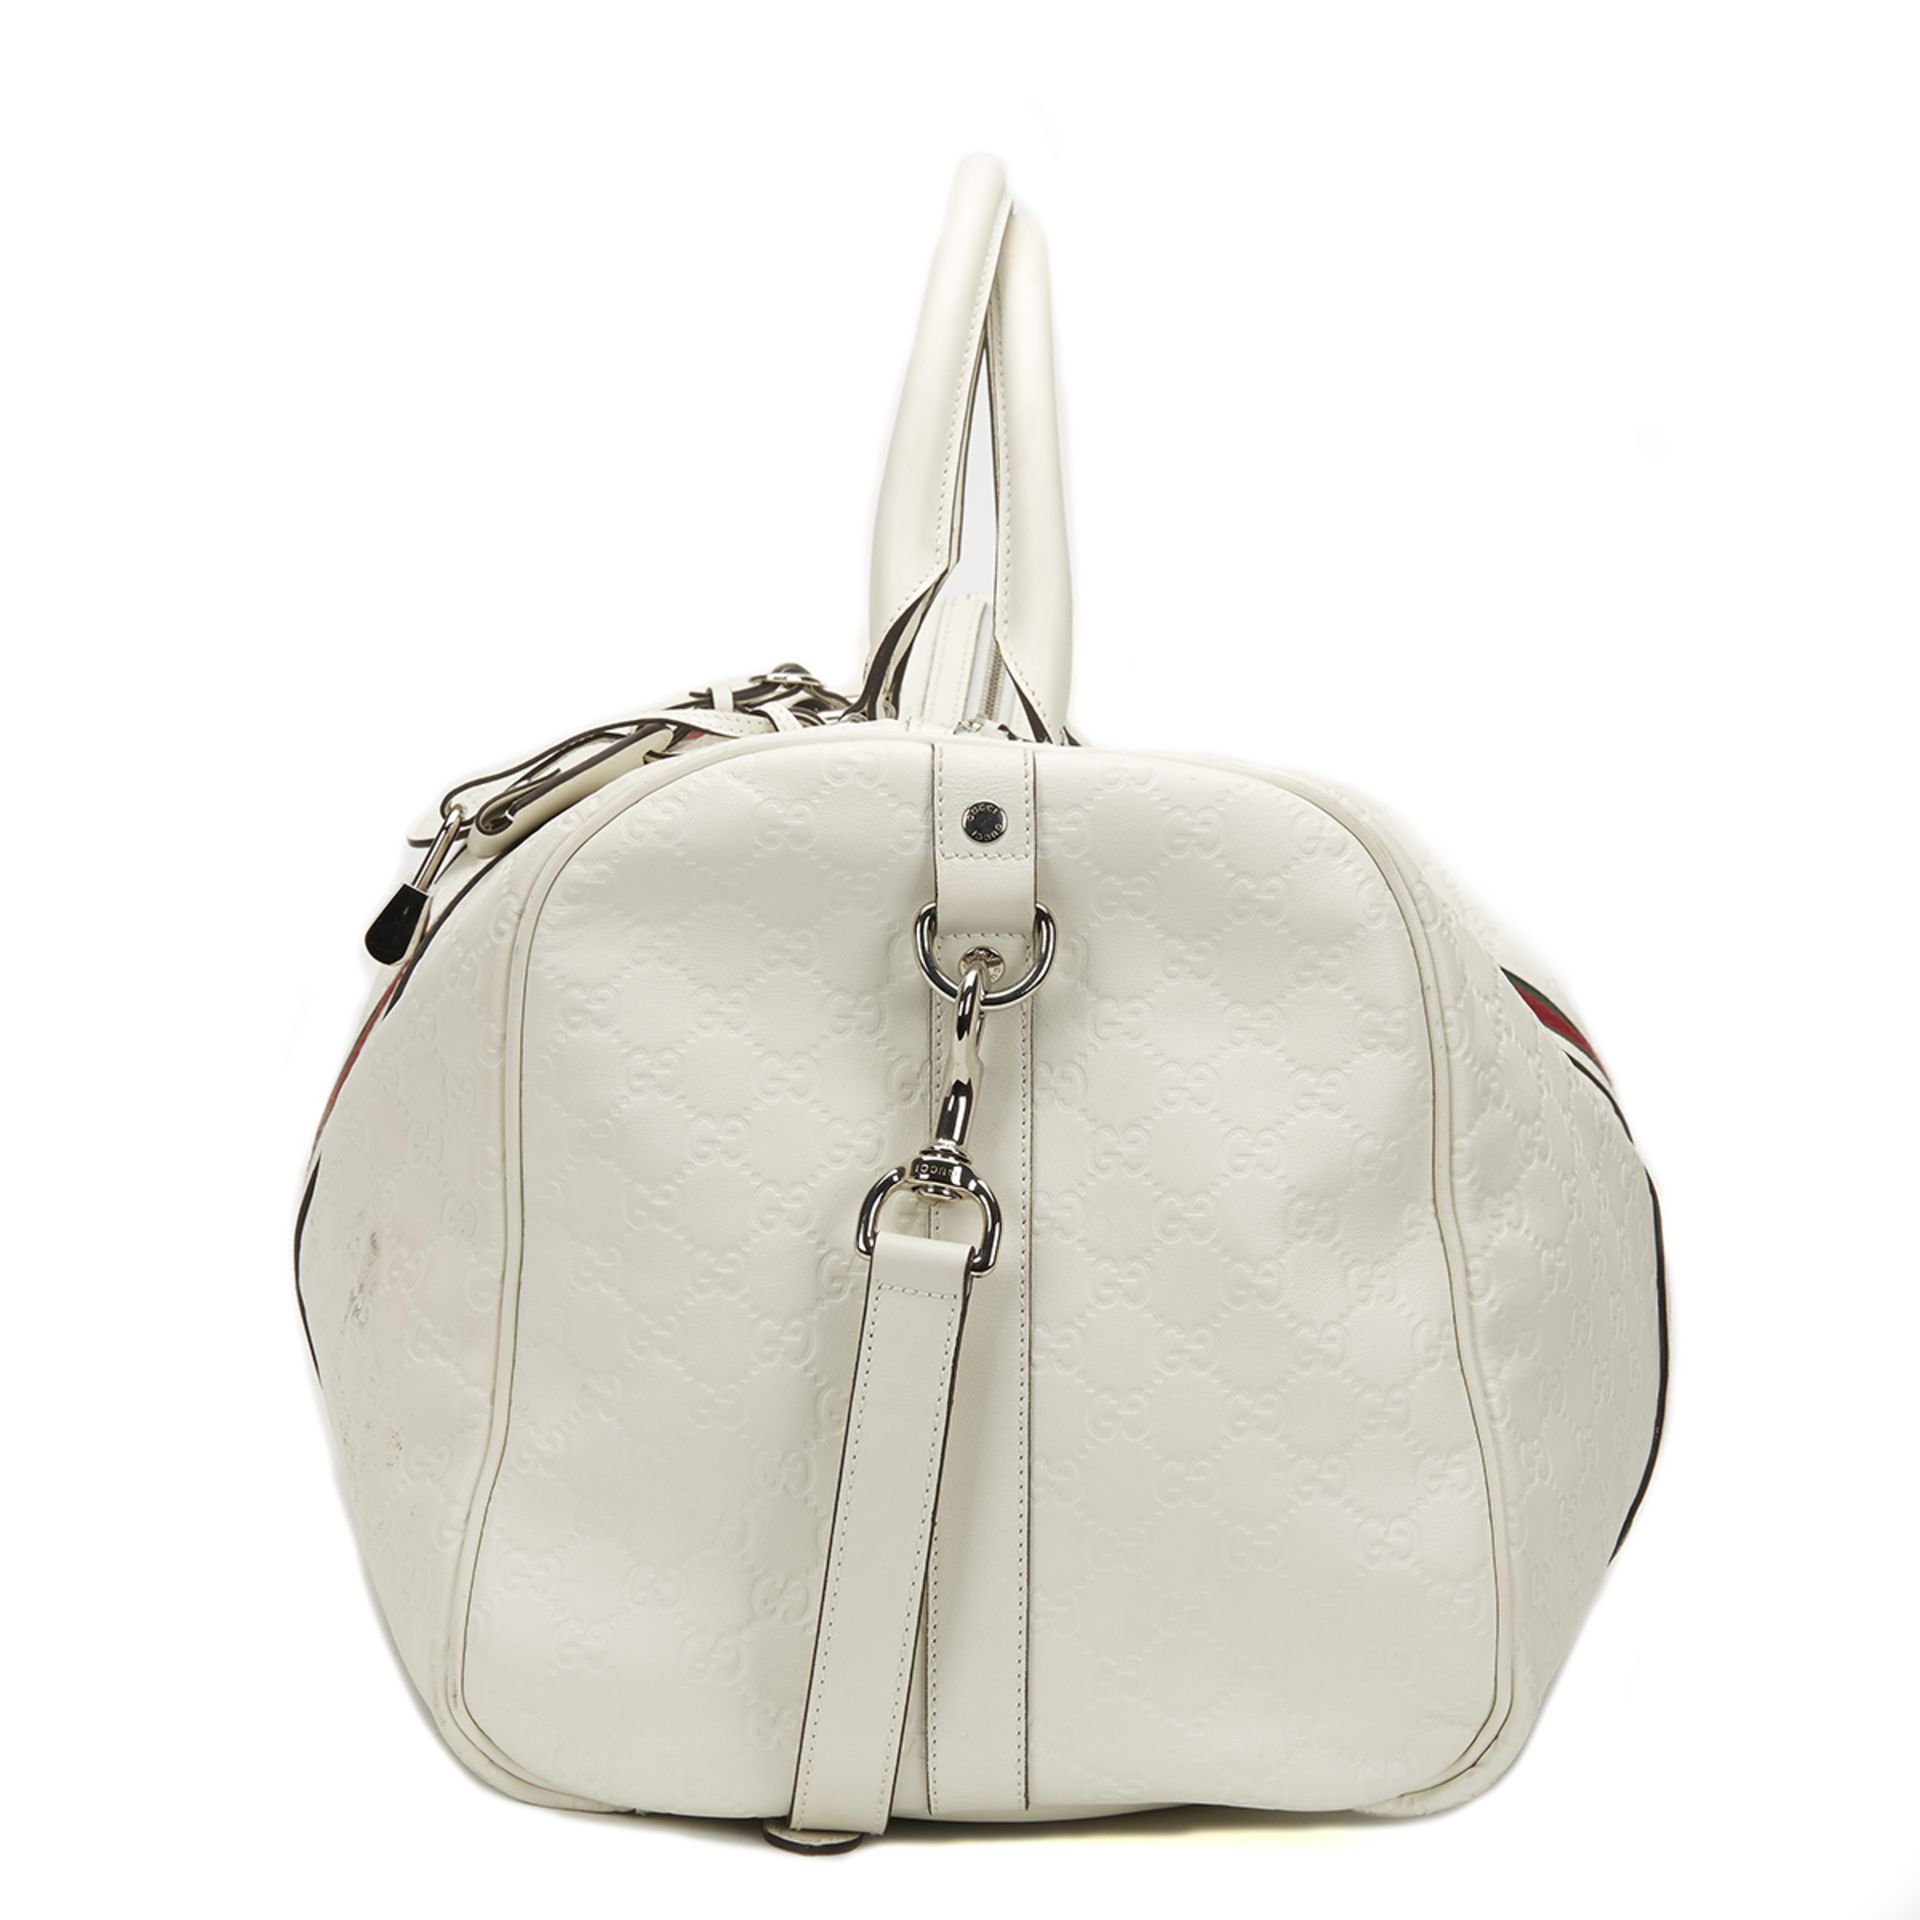 Gucci, Holdall - Image 3 of 8